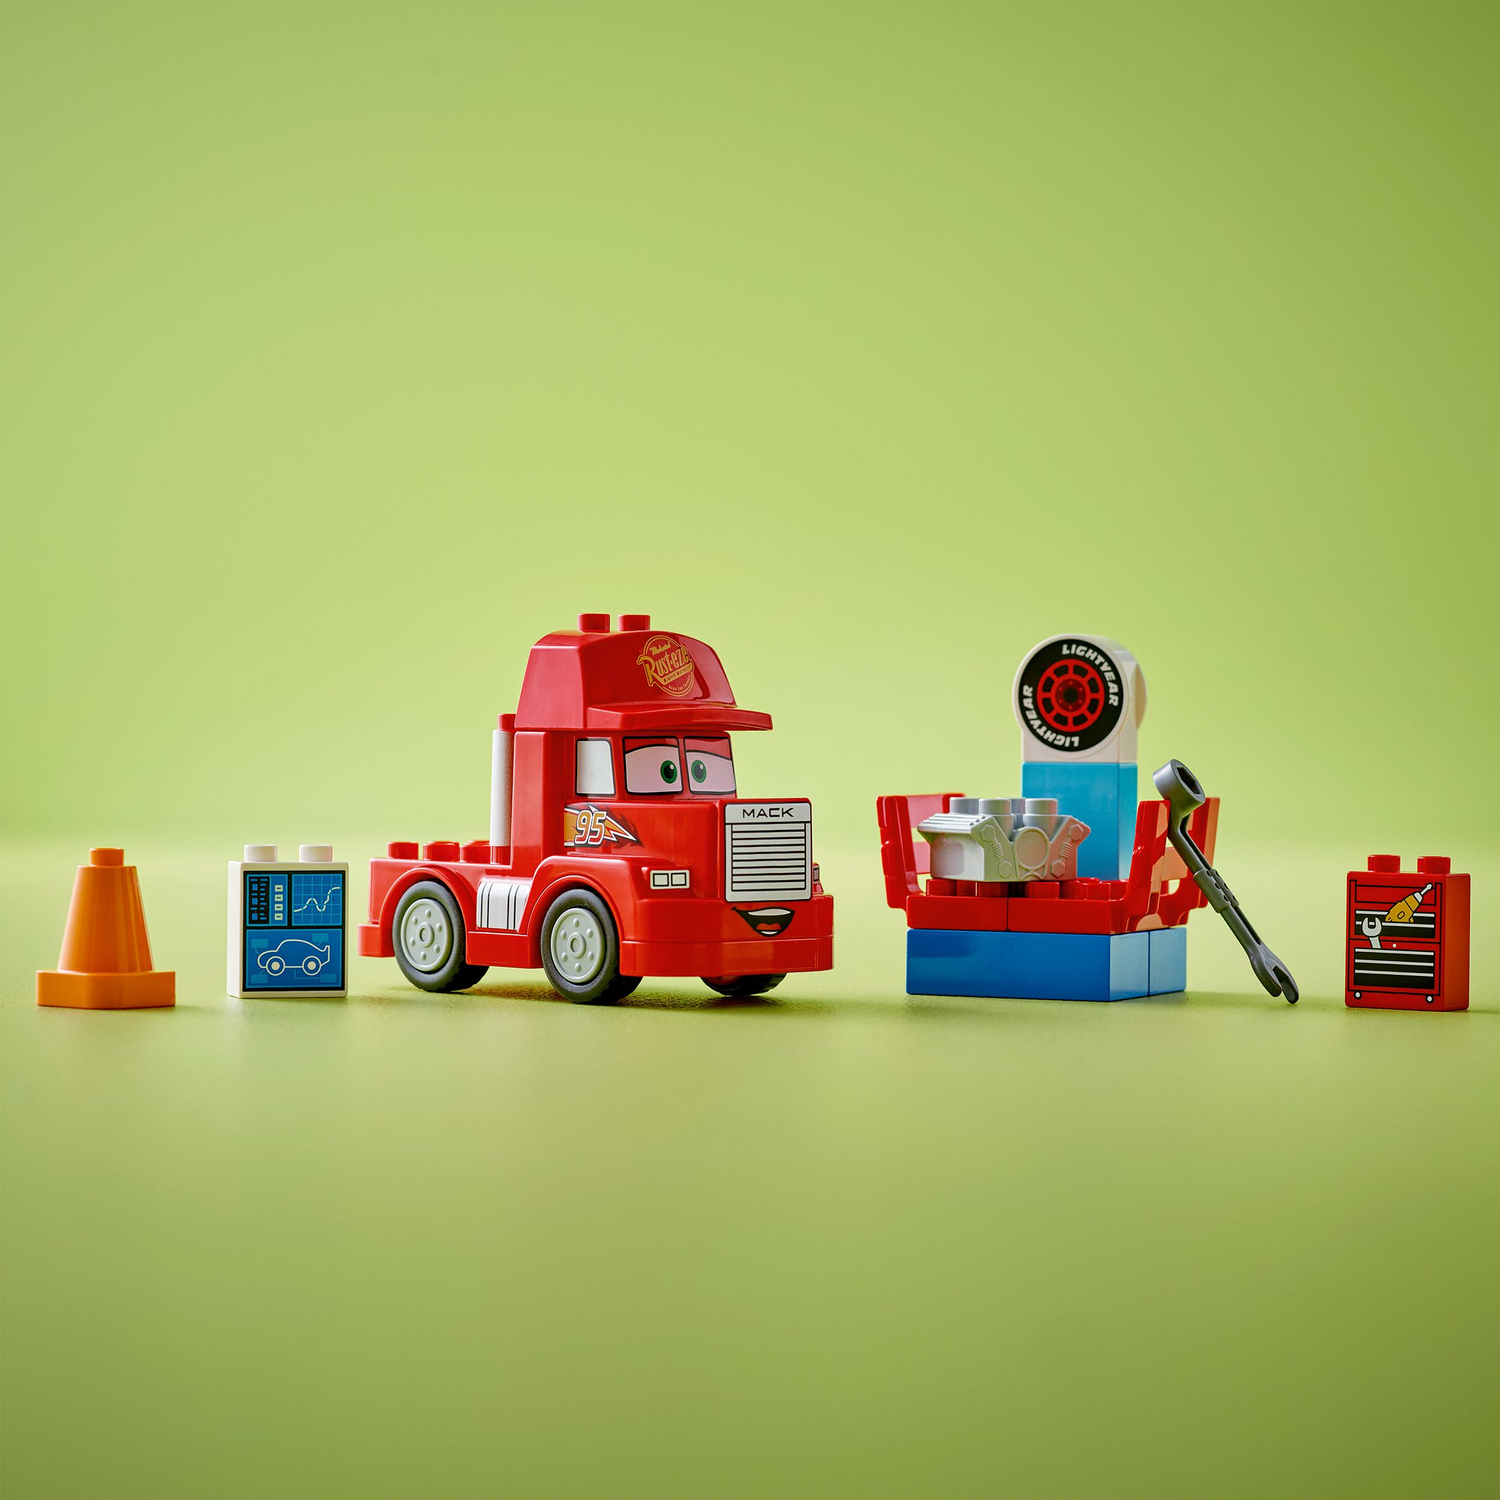 LEGO DUPLO Disney and Pixar’s Cars Mack at the Race